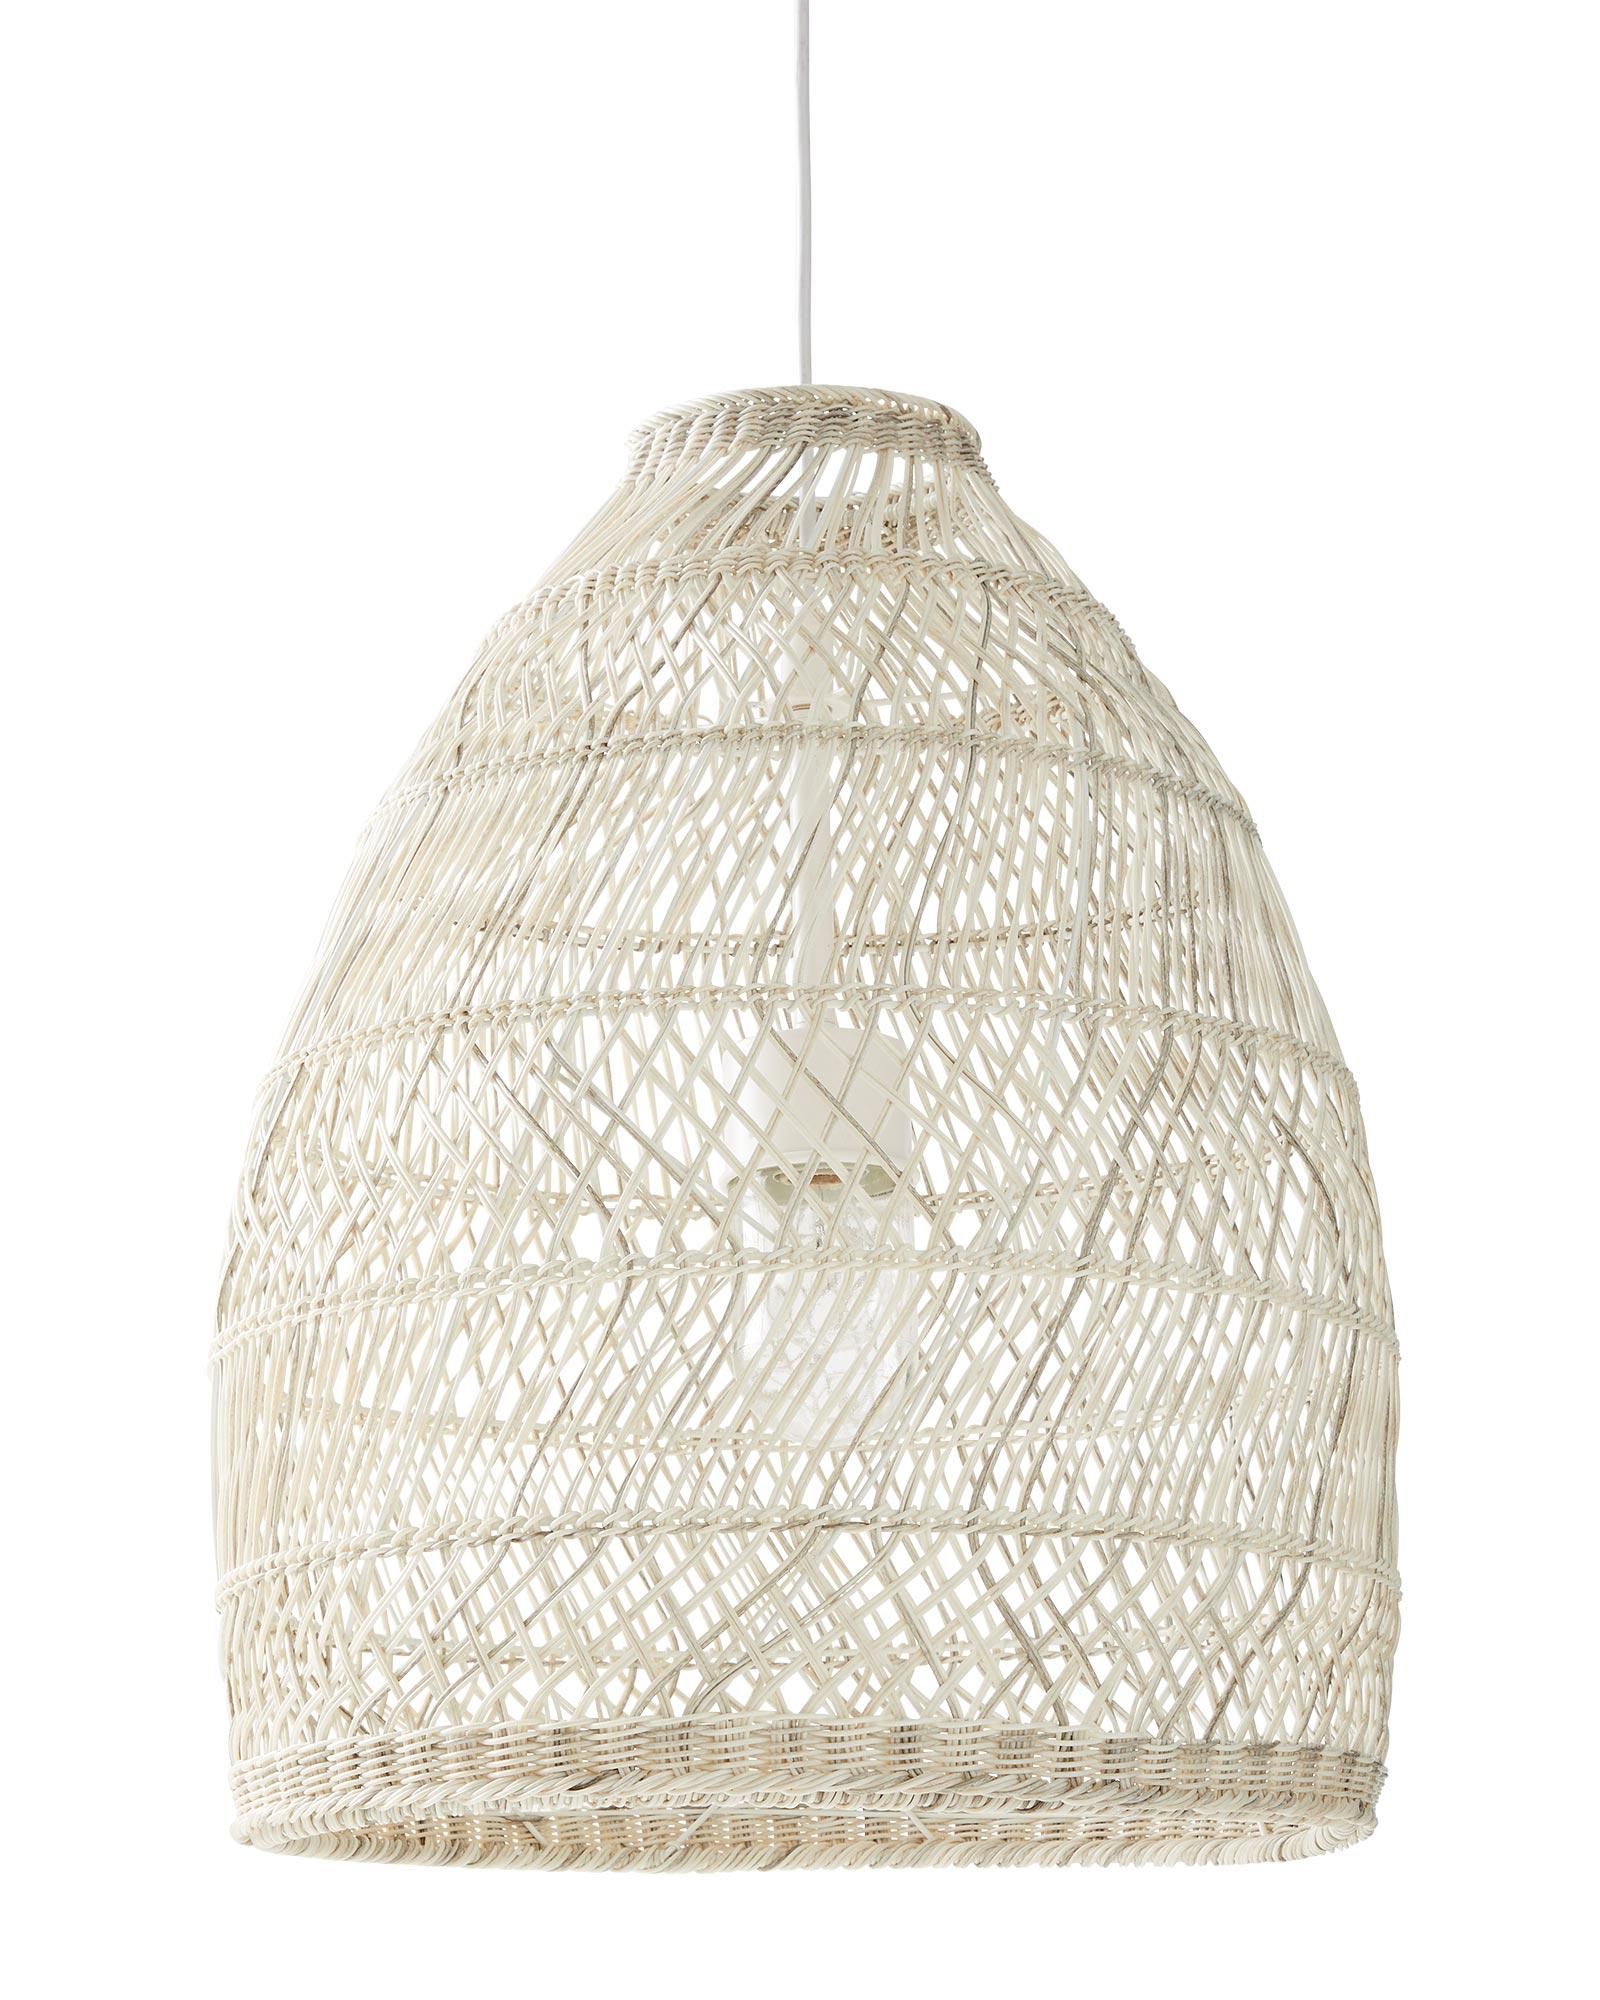 Summerland Outdoor Bell Pendant | Serena and Lily